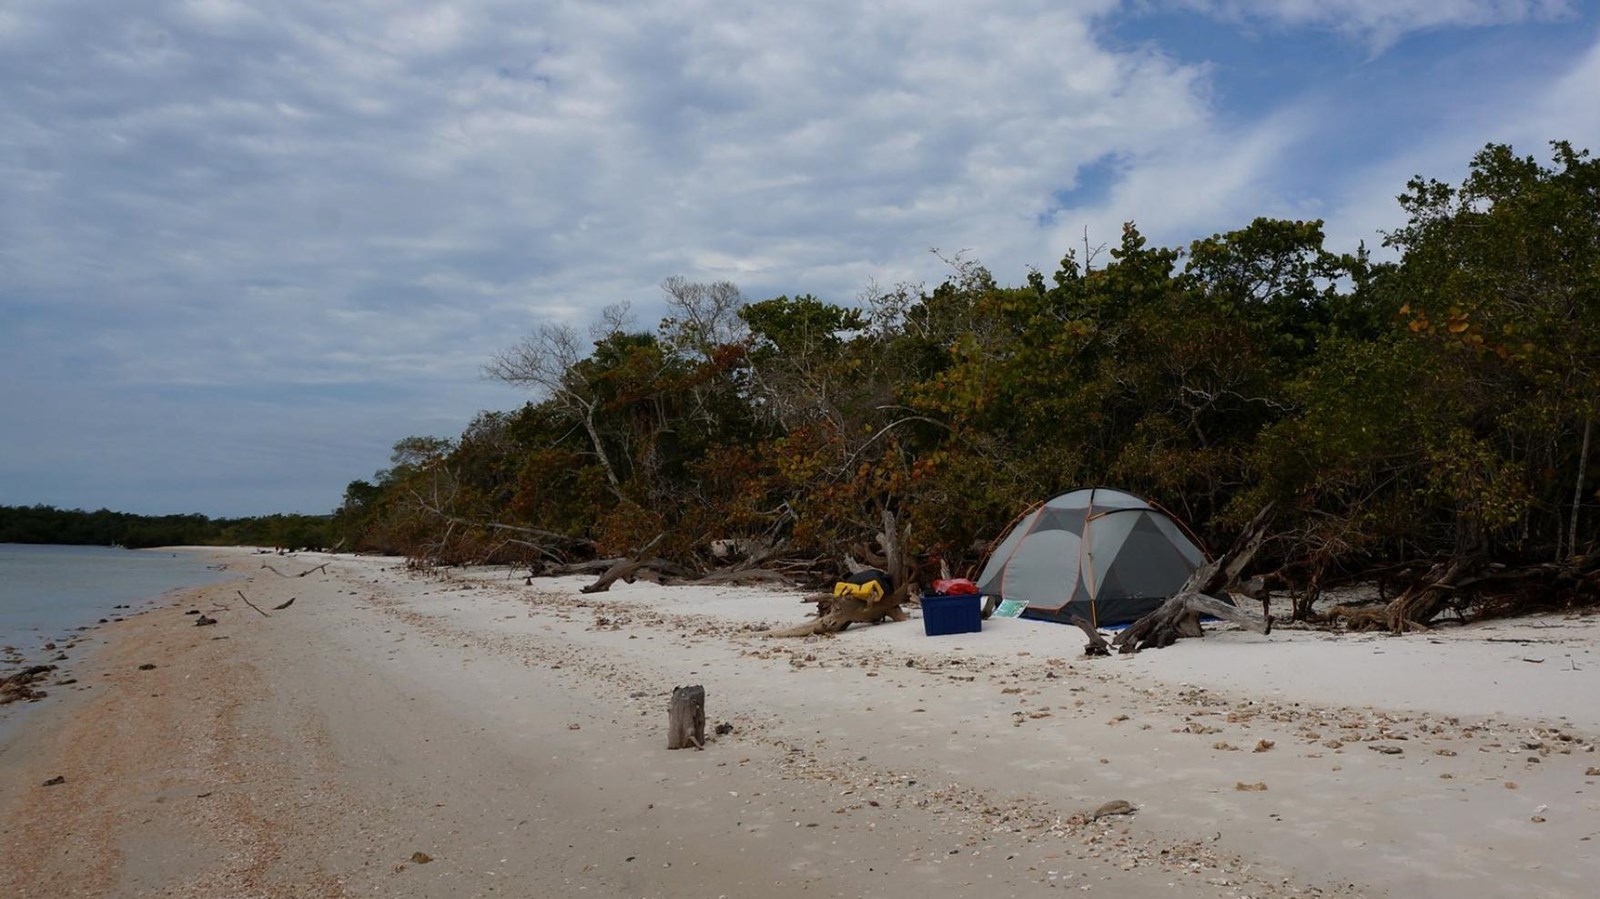 A gray tent is set up on a white sandy beach with green wide leafed sea grape trees behind it